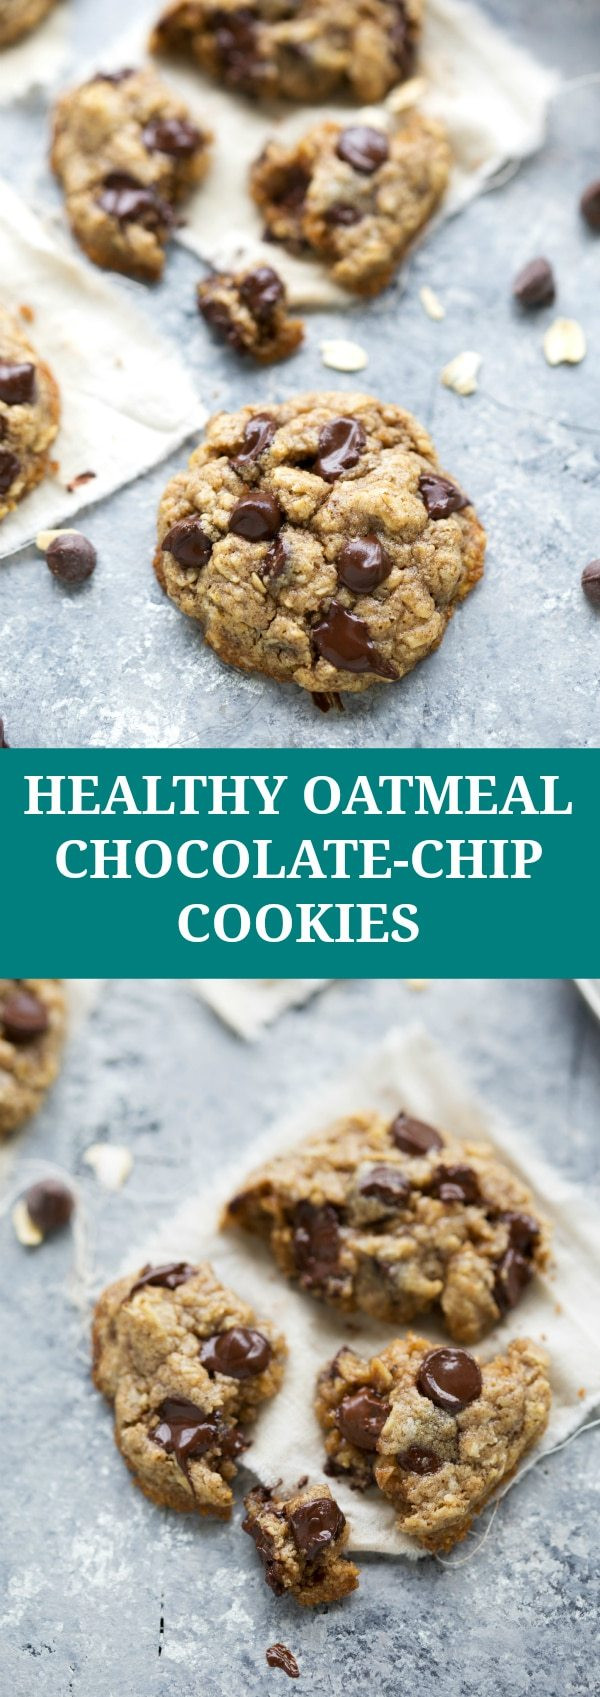 Oatmeal Chocolate Chip Cookies Healthy
 The BEST healthy oatmeal chocolate chip cookies Chelsea